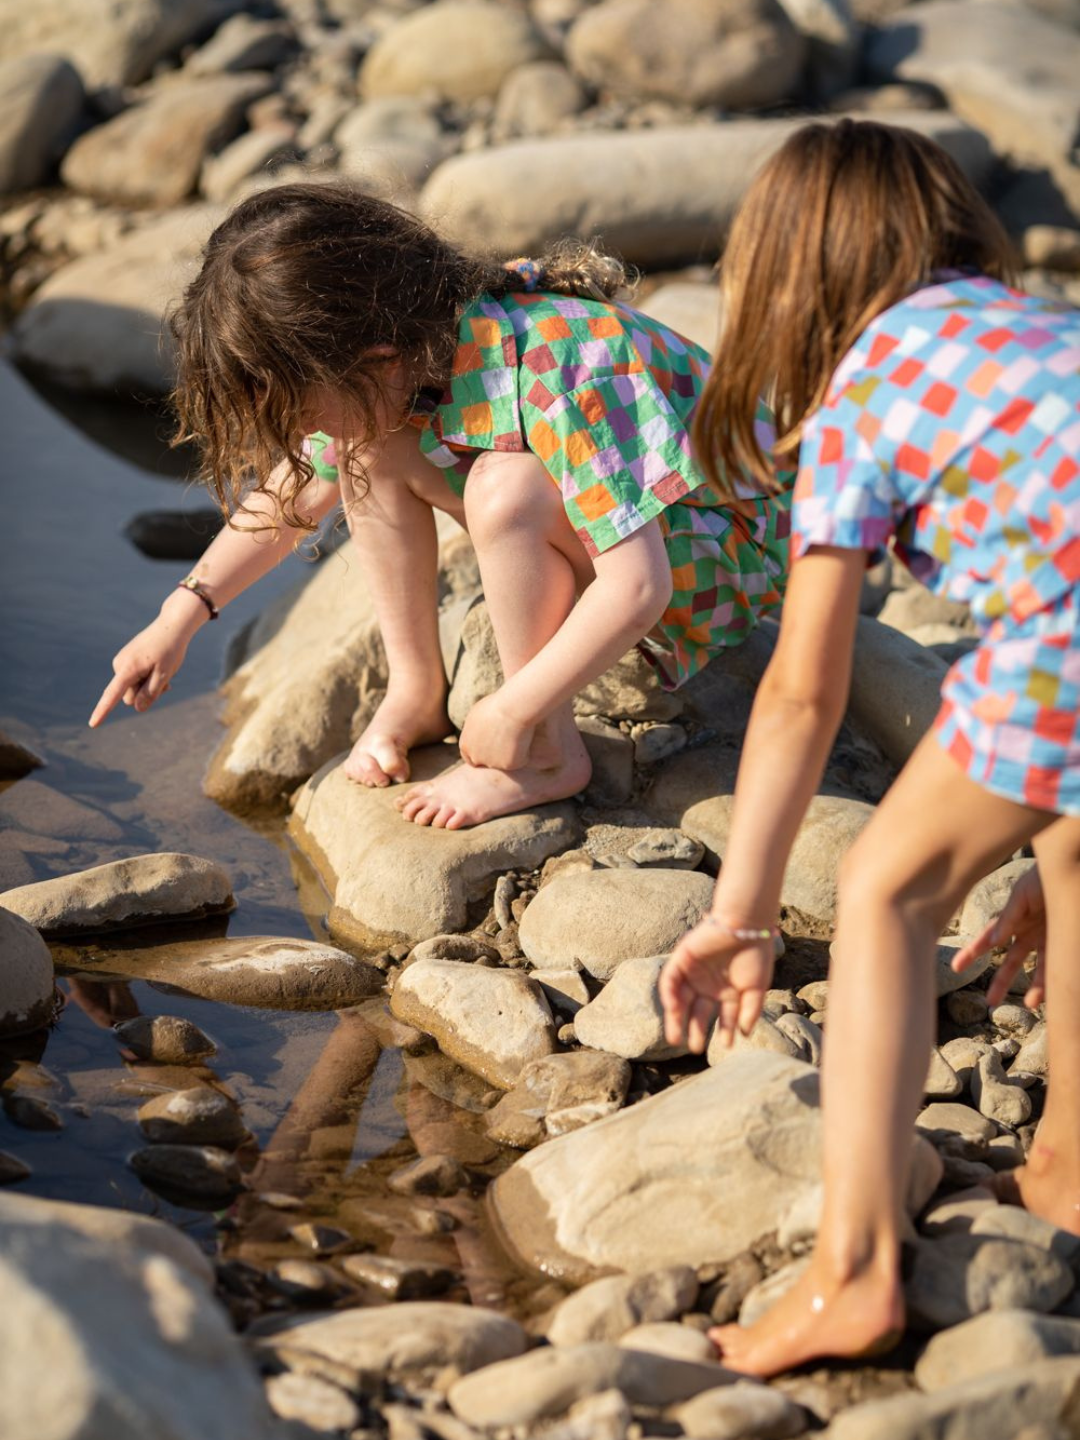 Two children by the water wearing kids' shirt and shorts sets in two different colorways: one with gold, orange, pink and purple squares on a green background; one with red, orange, pink, lilac and green squares on a blue background